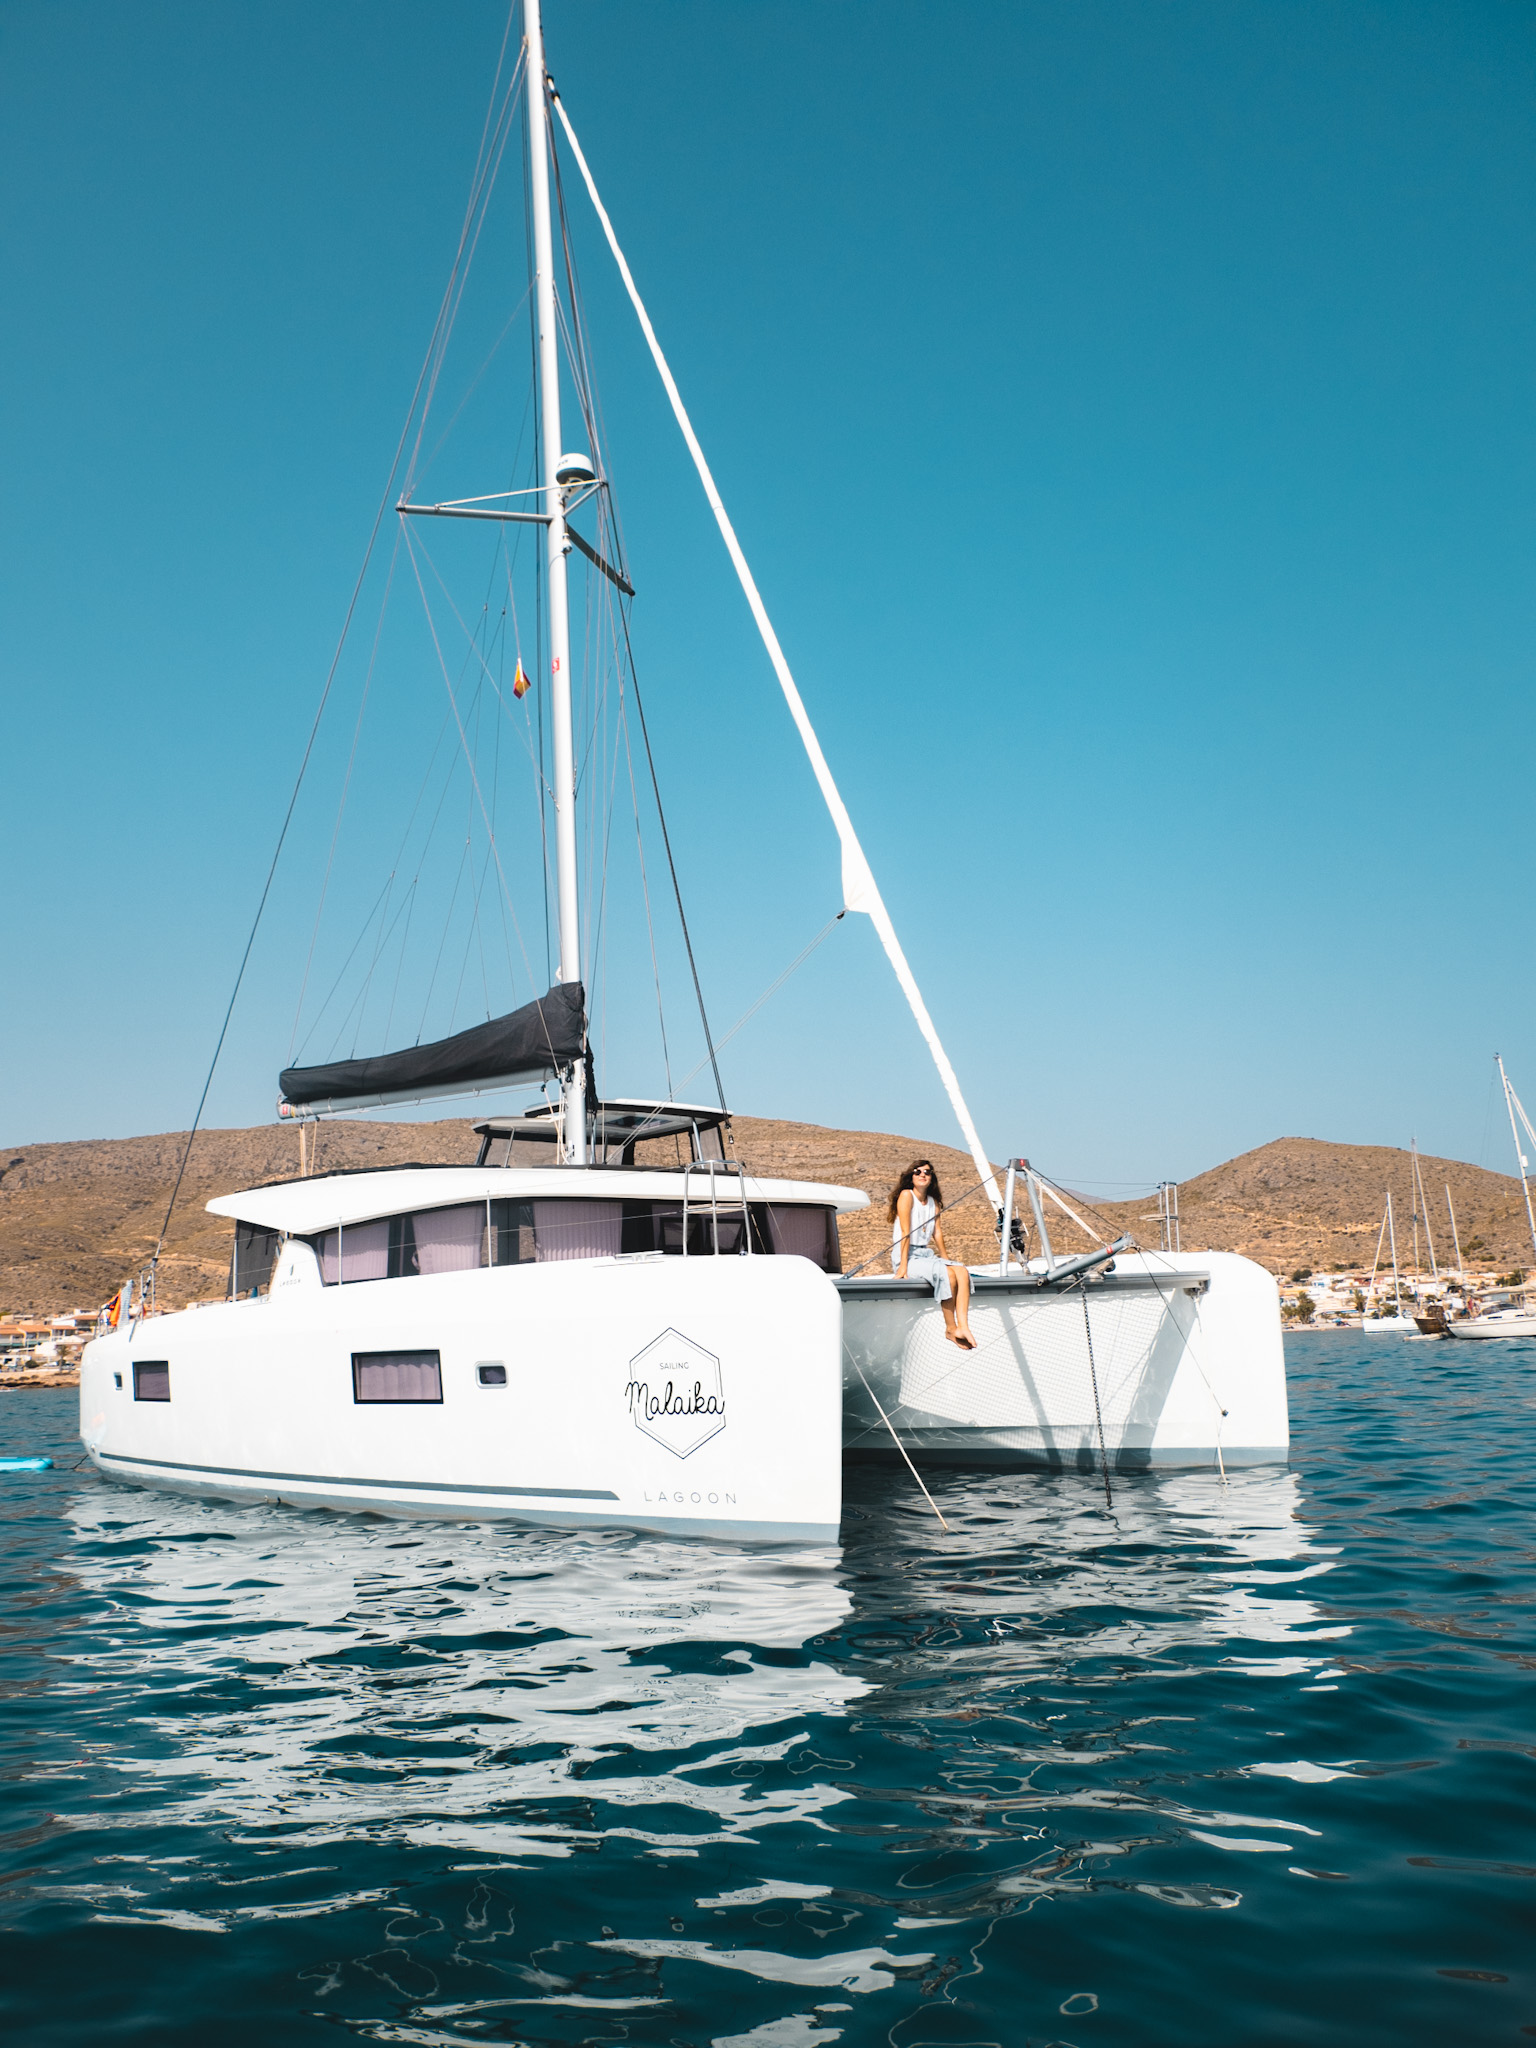 This is Malaika, the Lagoon 42 catamaran owned by Anas & Noellie